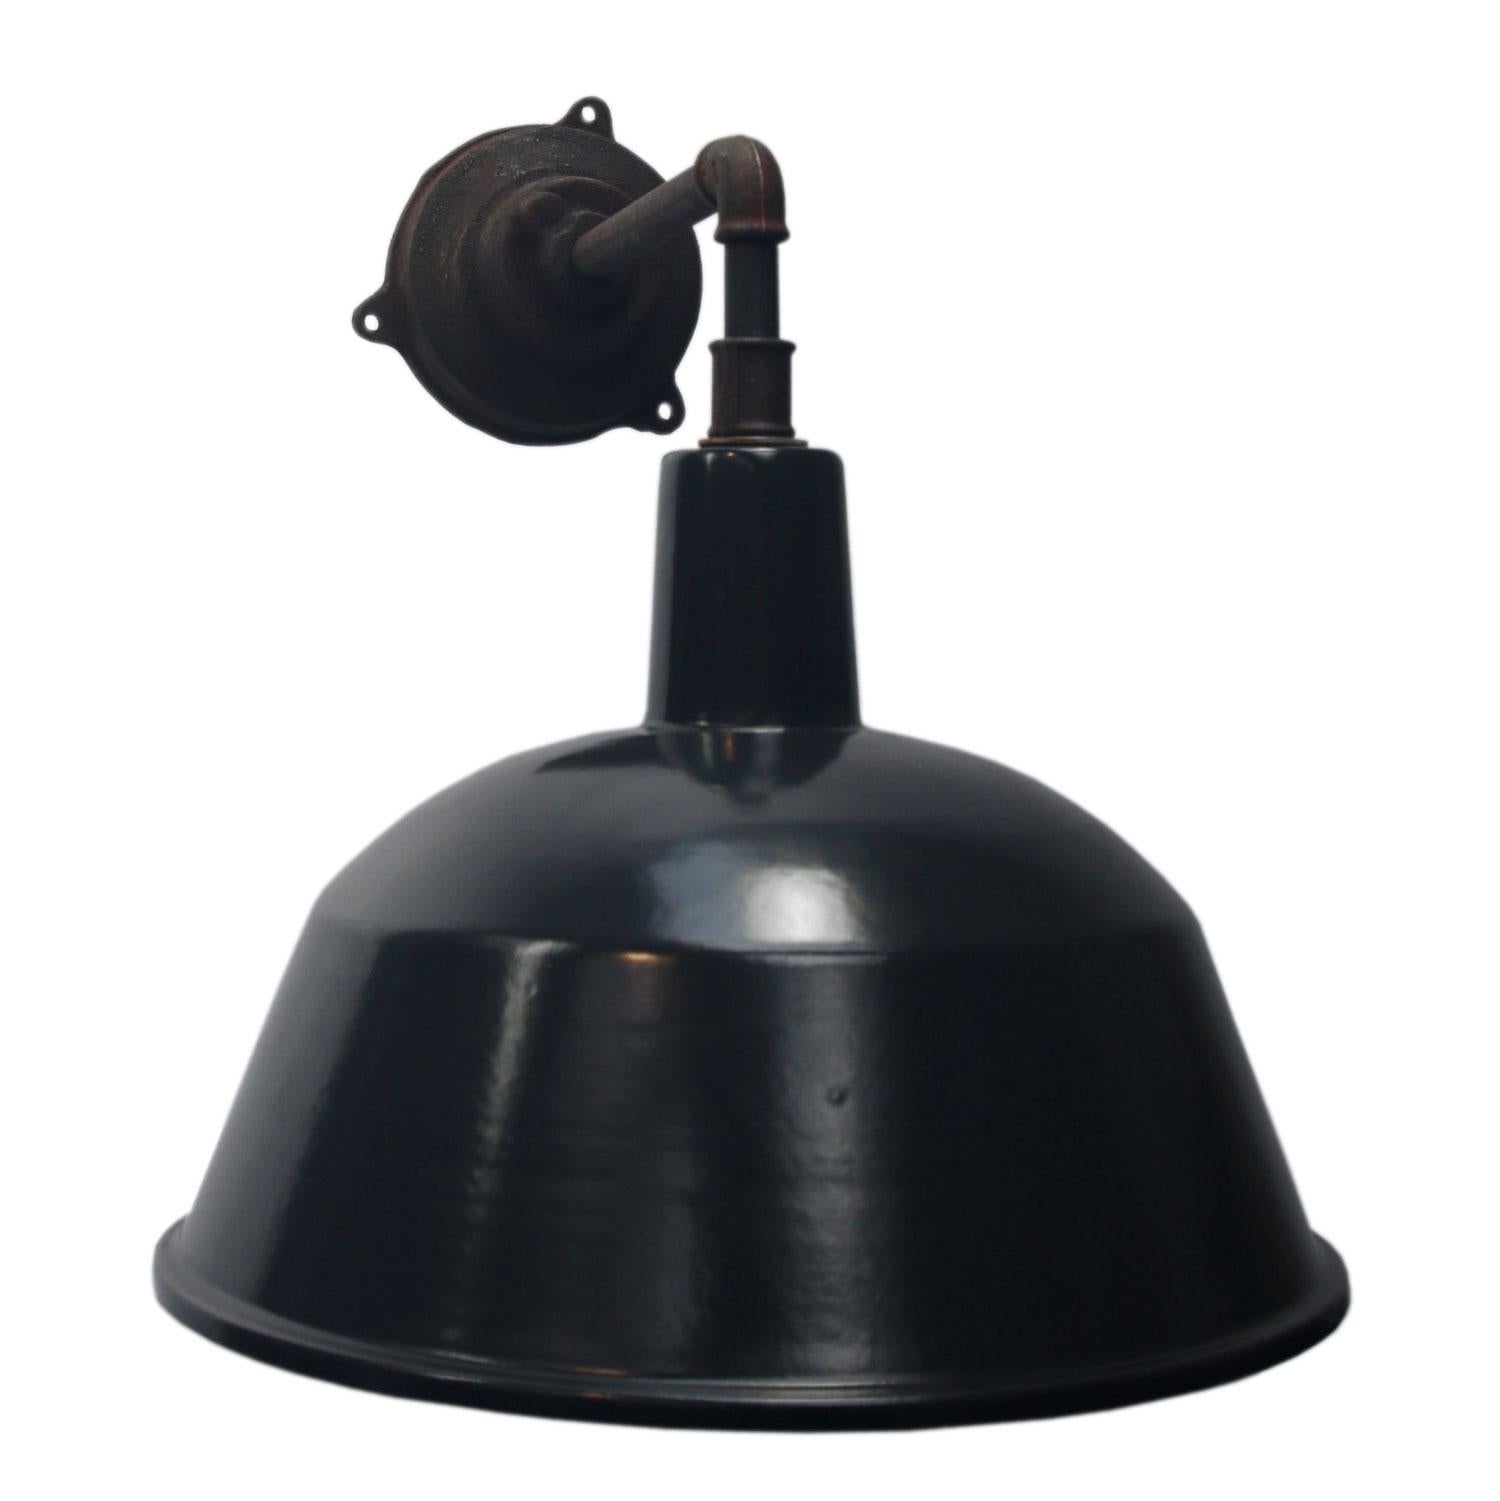 Factory wall light
Black / very dark gray enamel, white interior

Weight: 3.1 kg / 6.8 lb

Priced per individual item. All lamps have been made suitable by international standards for incandescent light bulbs, energy-efficient and LED bulbs. E26/E27